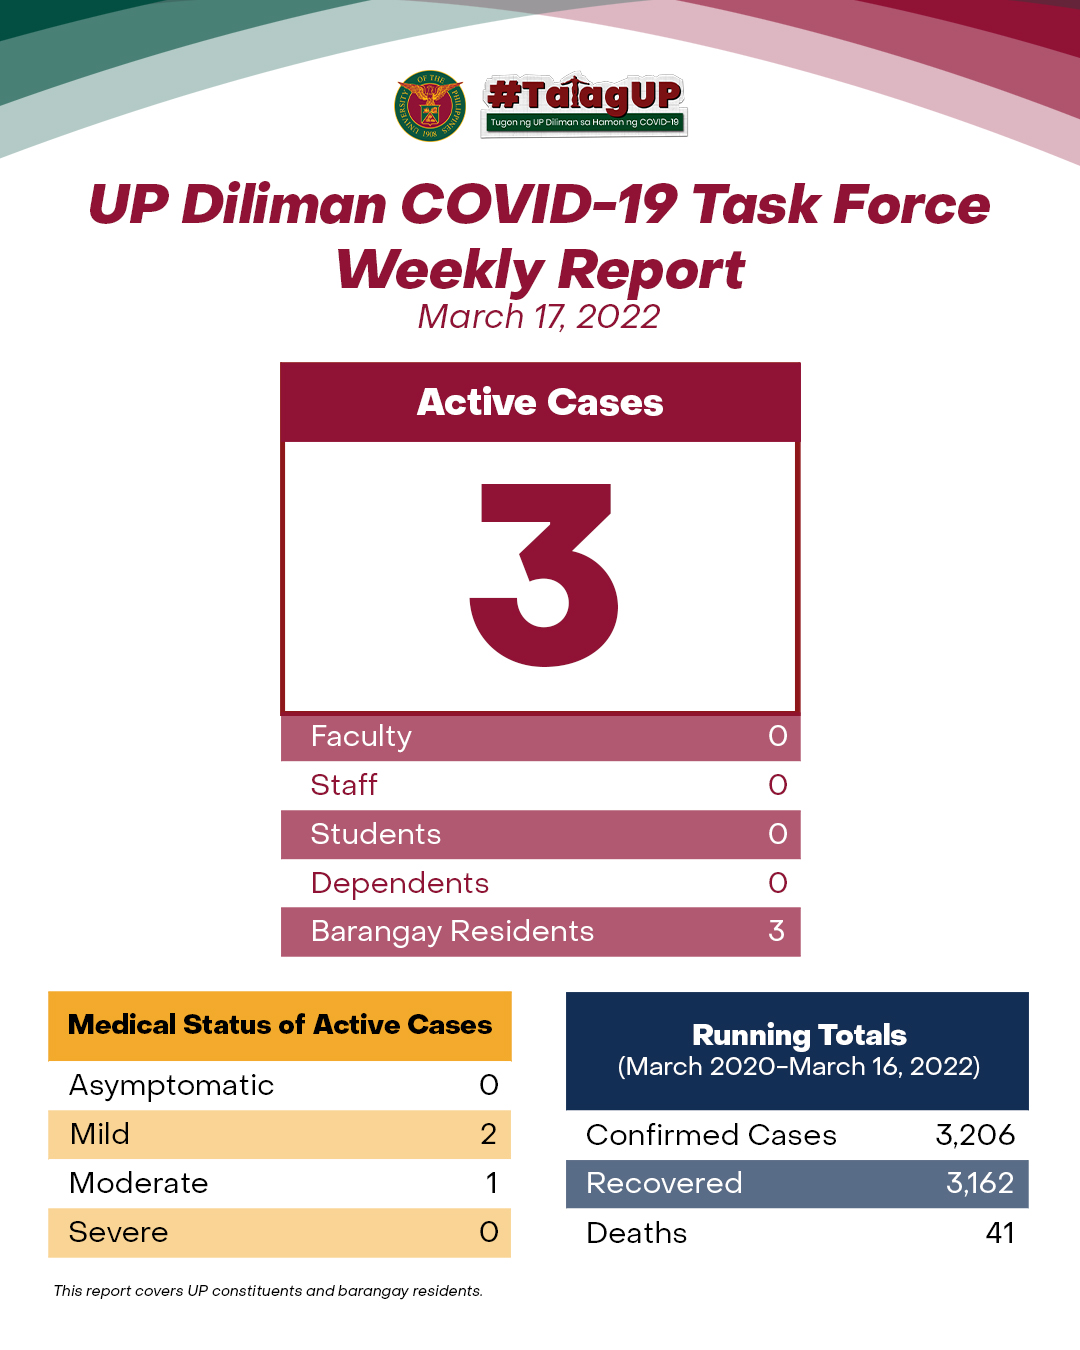 UP Diliman COVID-19 Task Force Weekly Report (March 17, 2022)